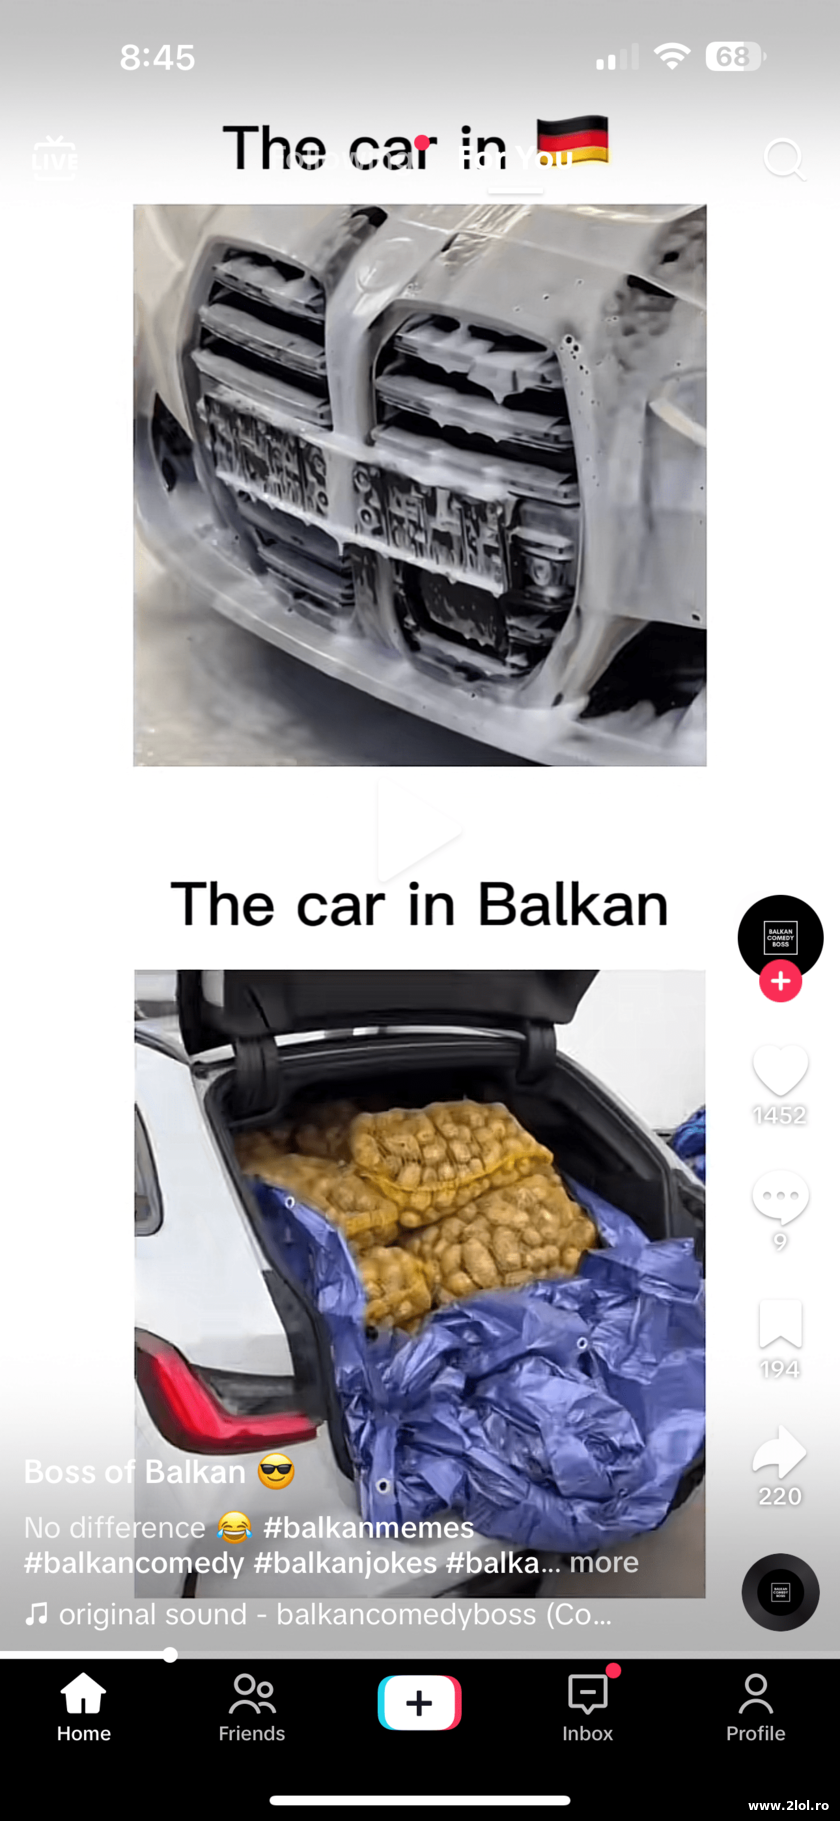 The car in Germany and Balkan | poze haioase